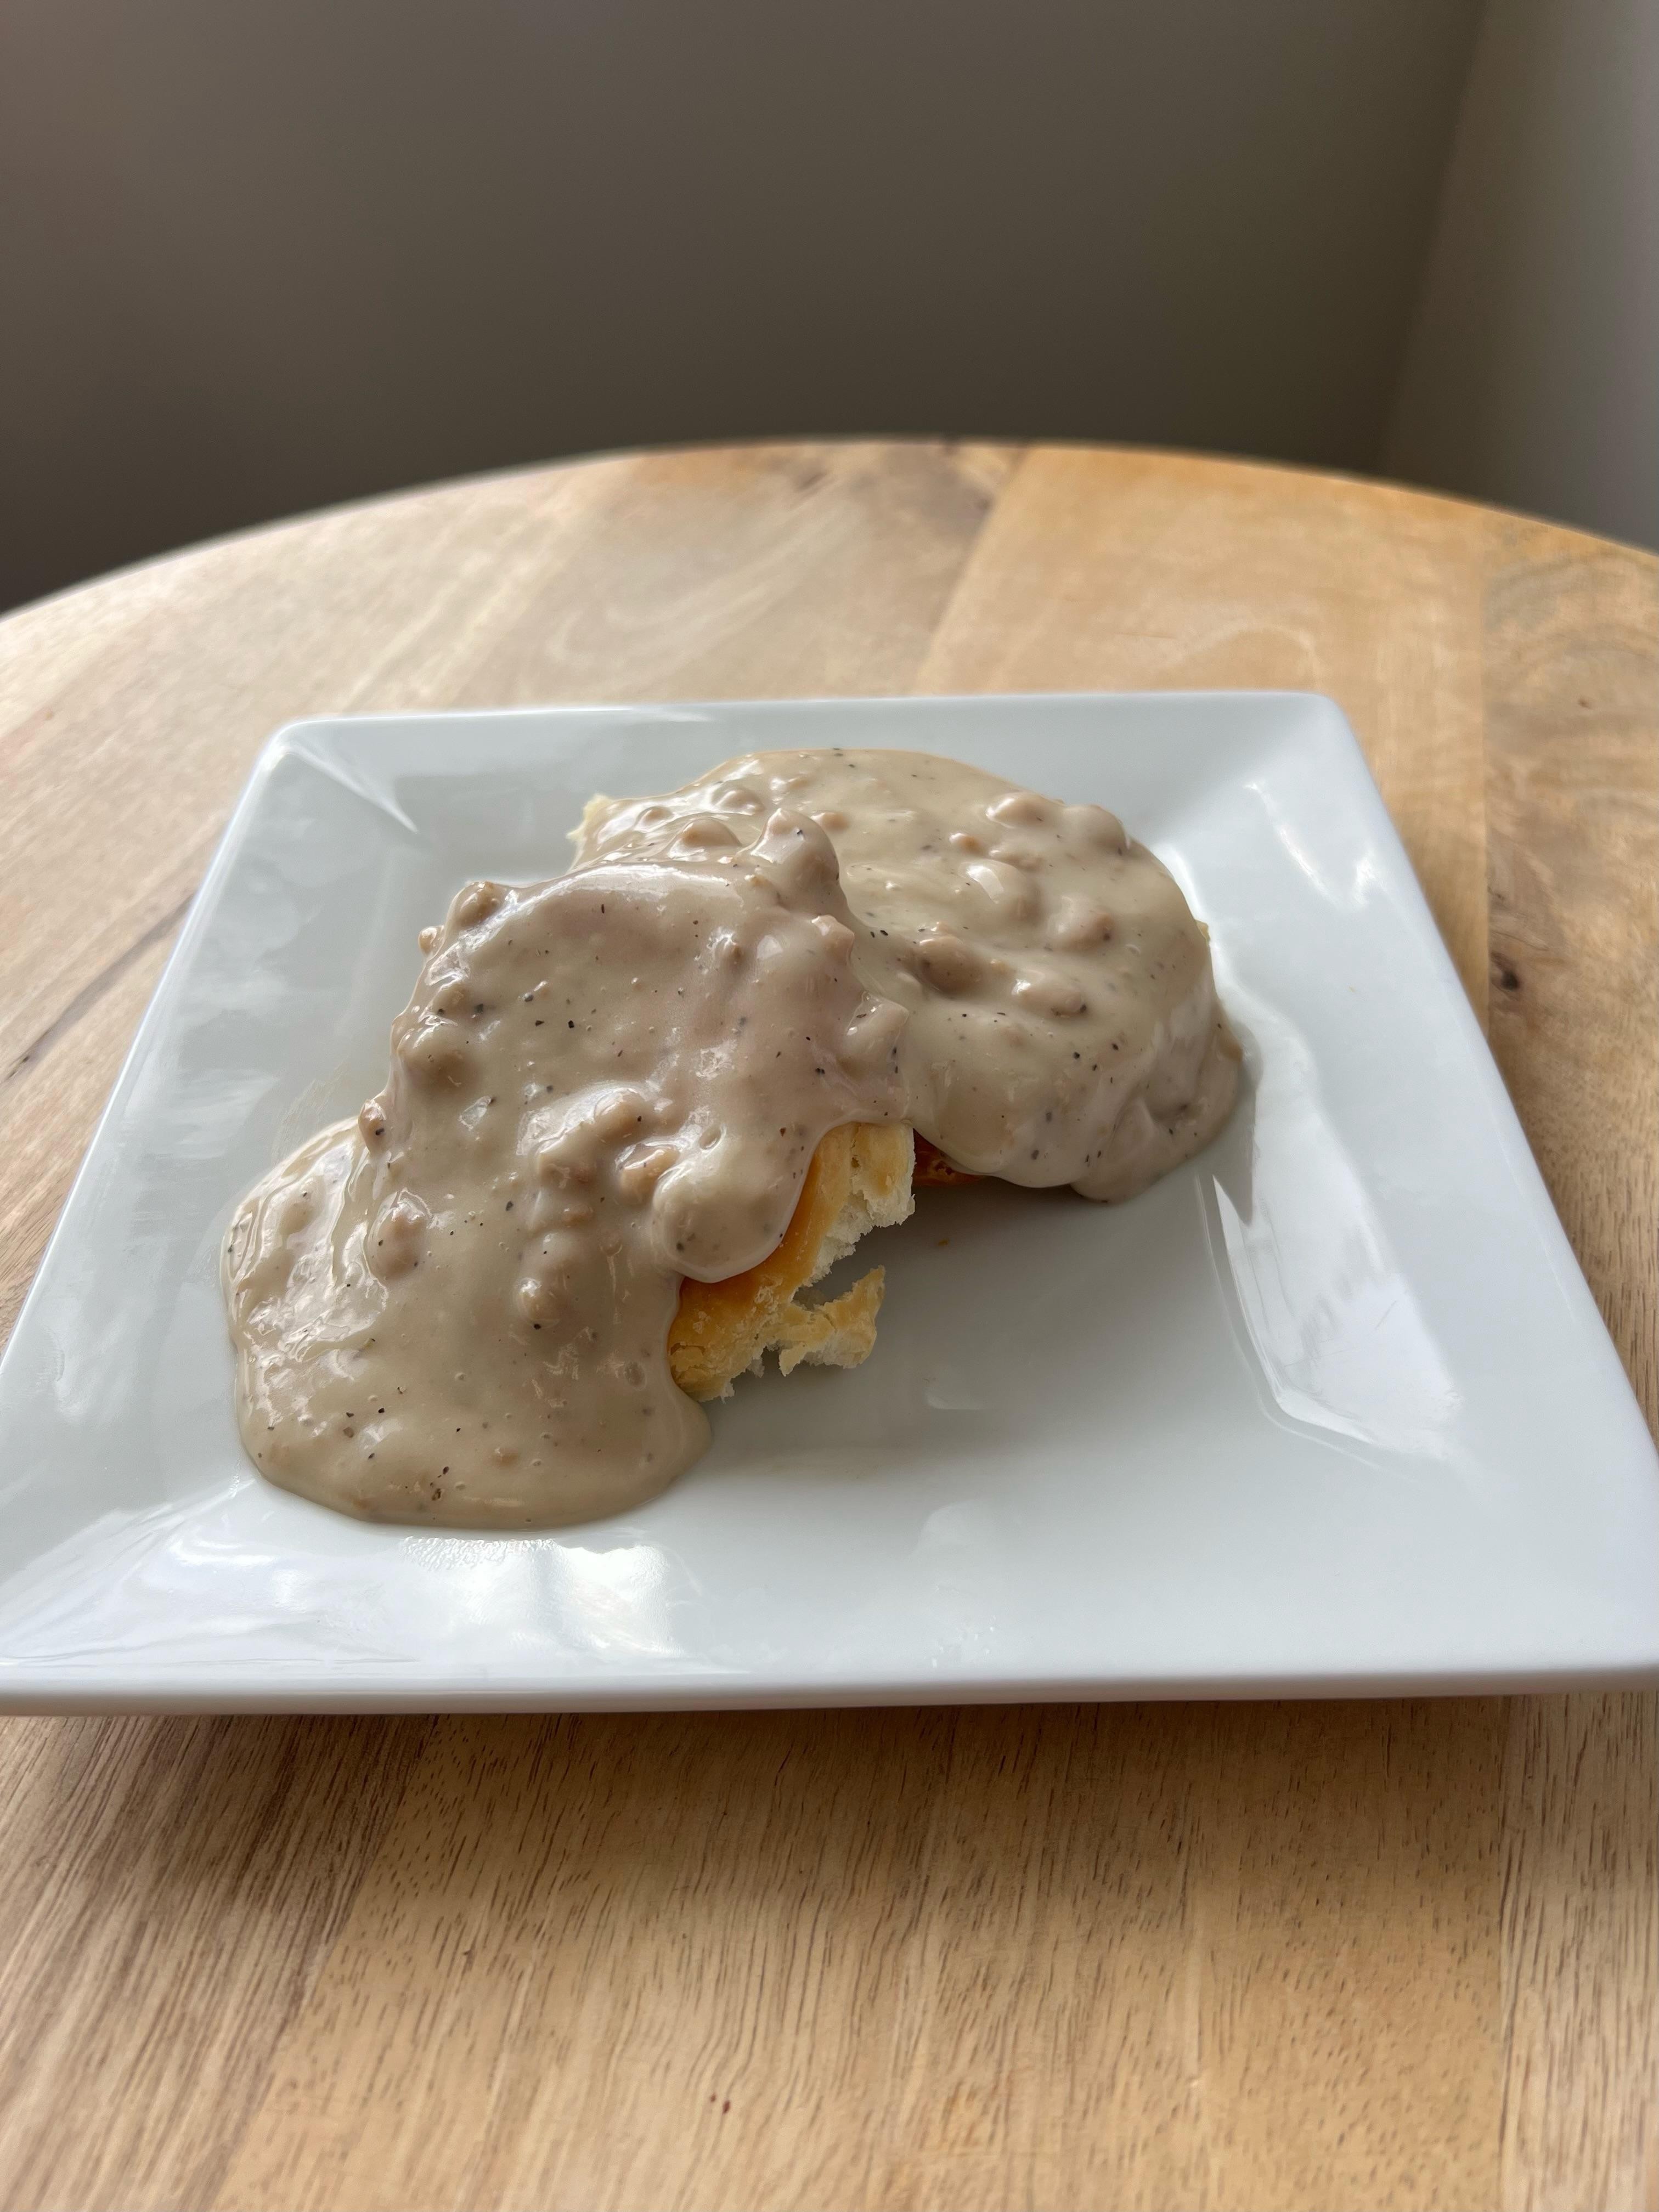 SAUSAGE GRAVY AND BISCUITS